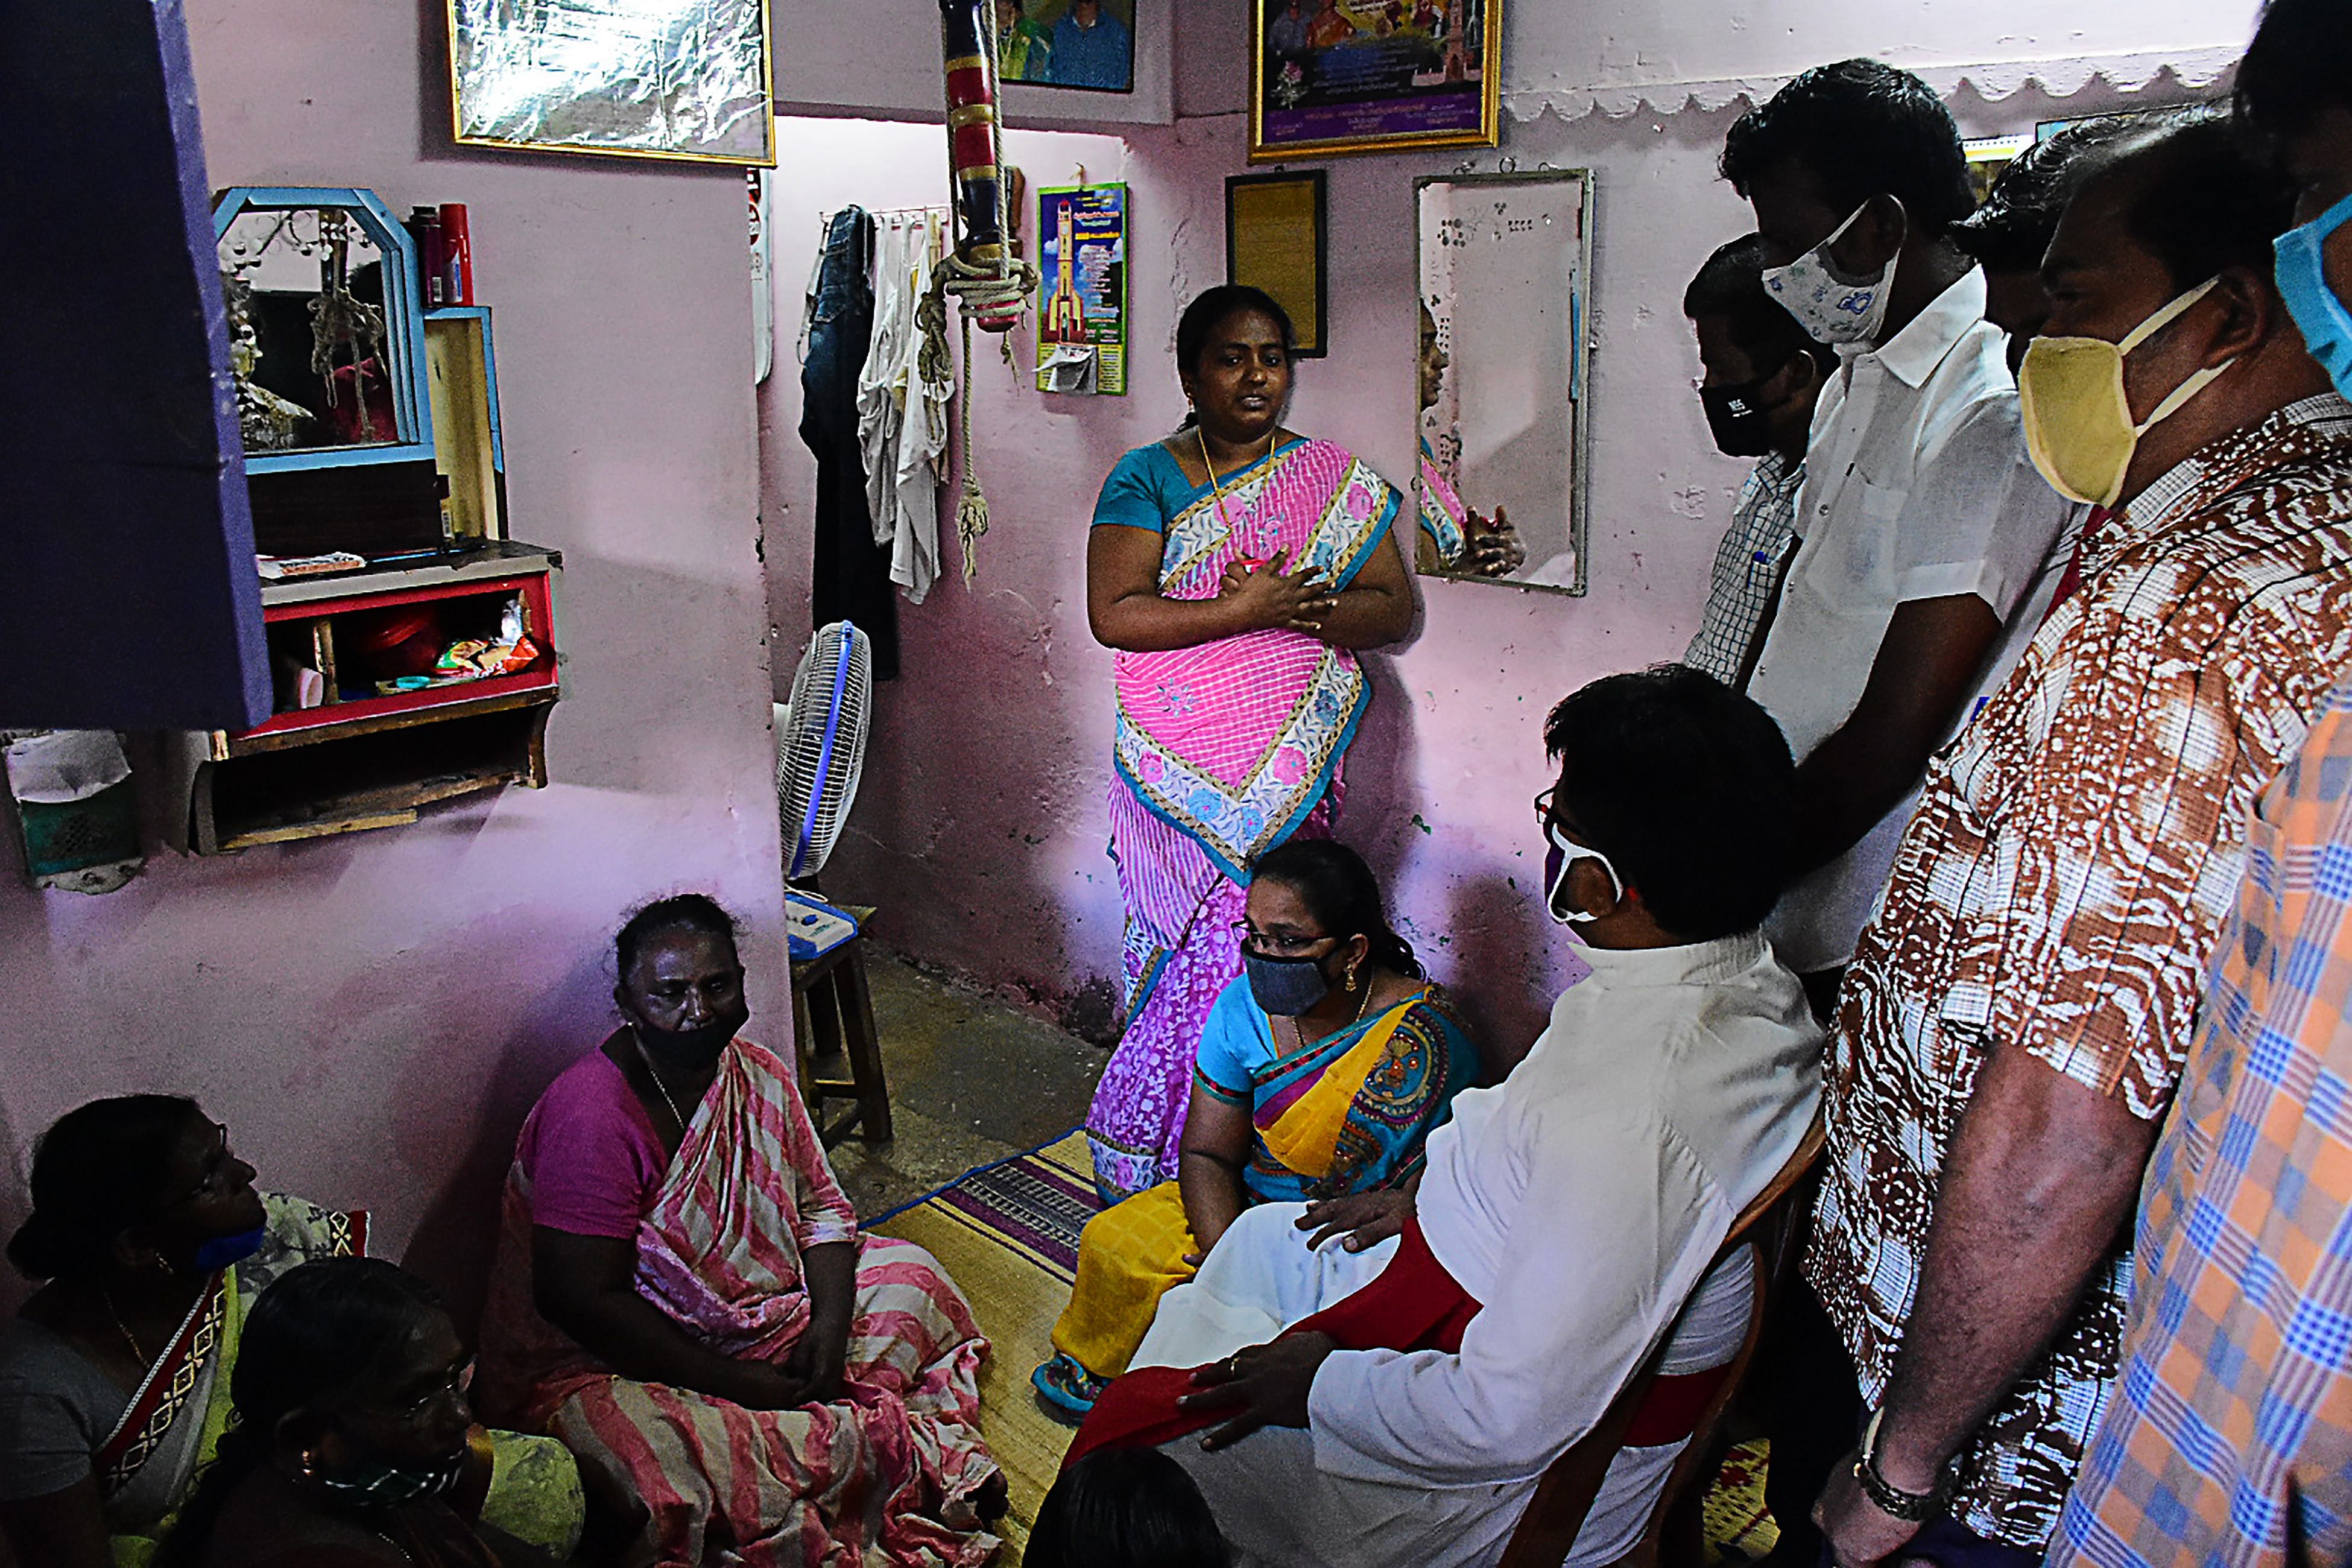 A church priest consoles family members of Jayaraj, 58, and son Bennicks Immanuel, 31, allegedly tortured at the hands of police in Sathankulam. Credit: AFP Photo